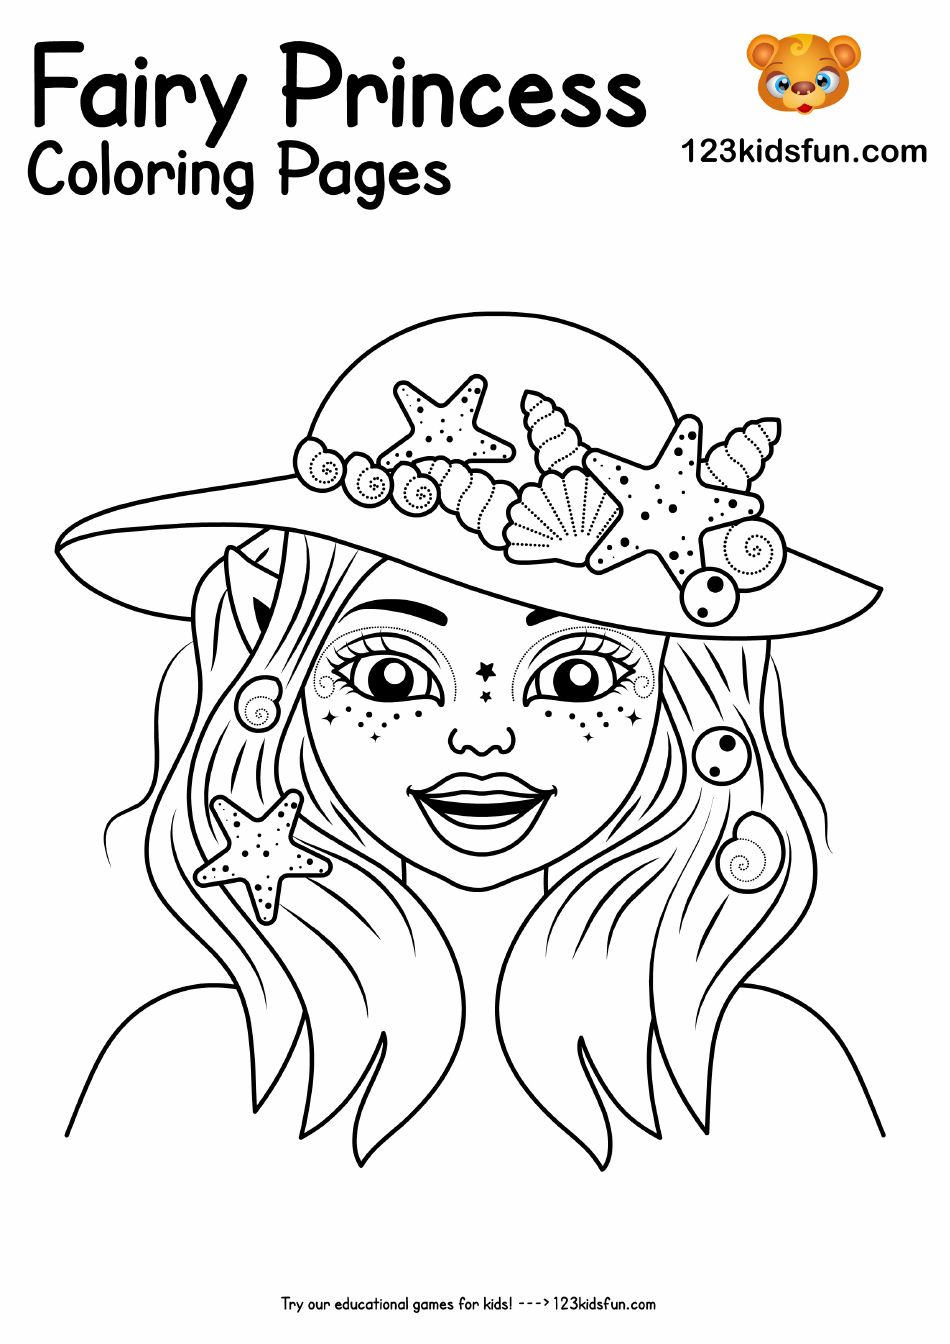 Fairy Princess Coloring Page - Fun and Creative Activity for Kids